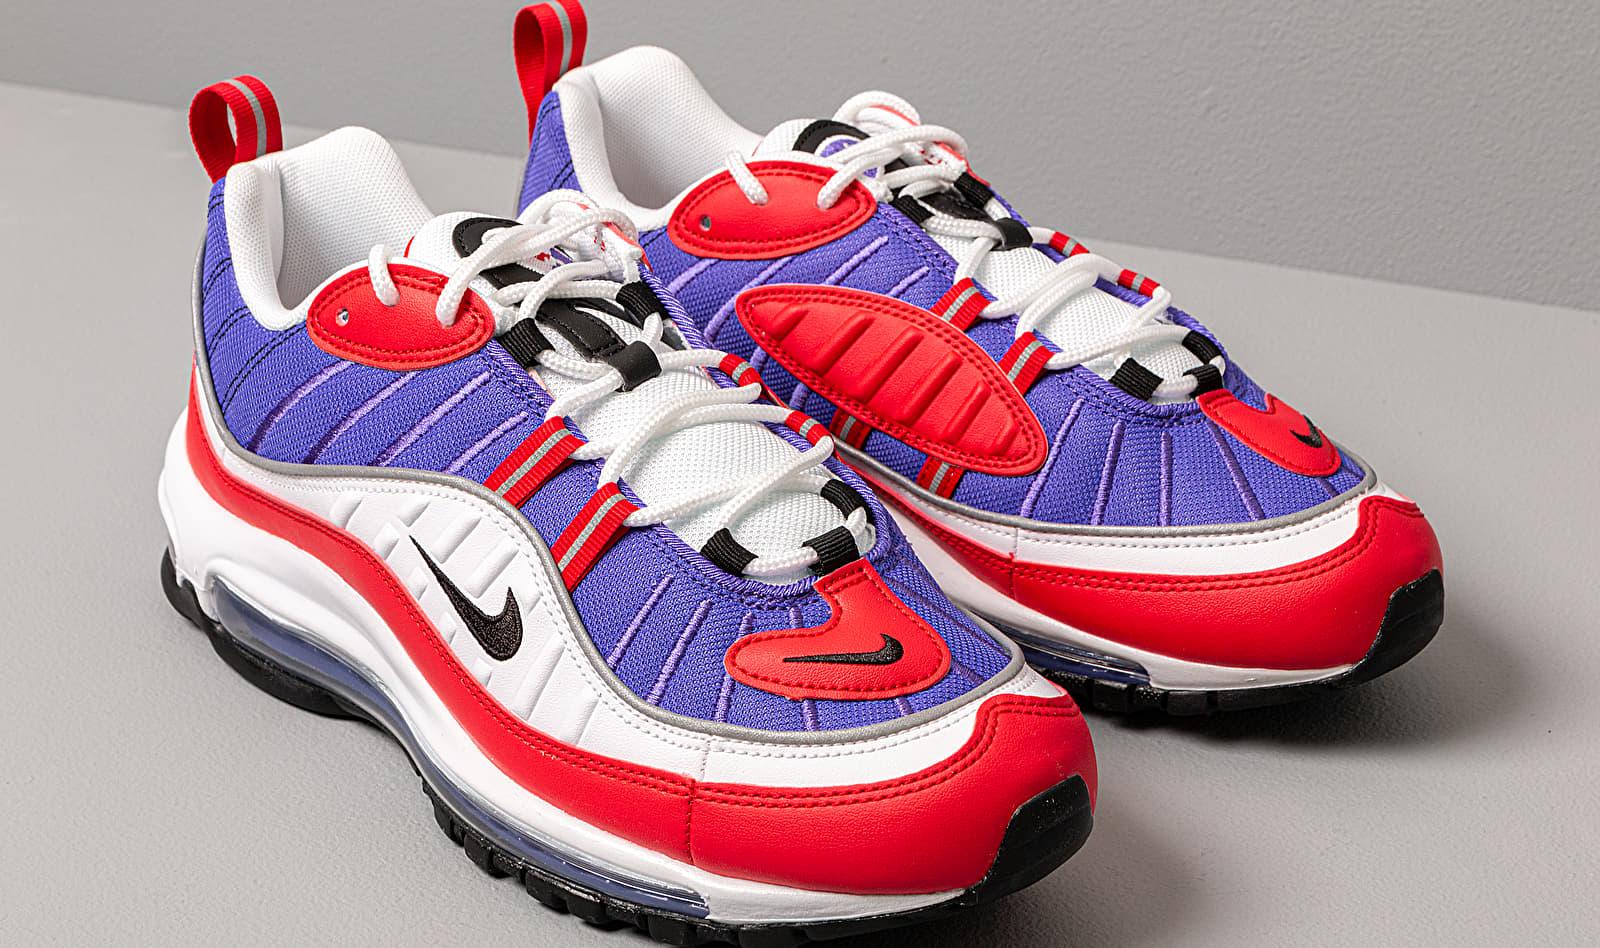 Nike Synthetic Air Max 98 in Purple/Red (Purple) | Lyst